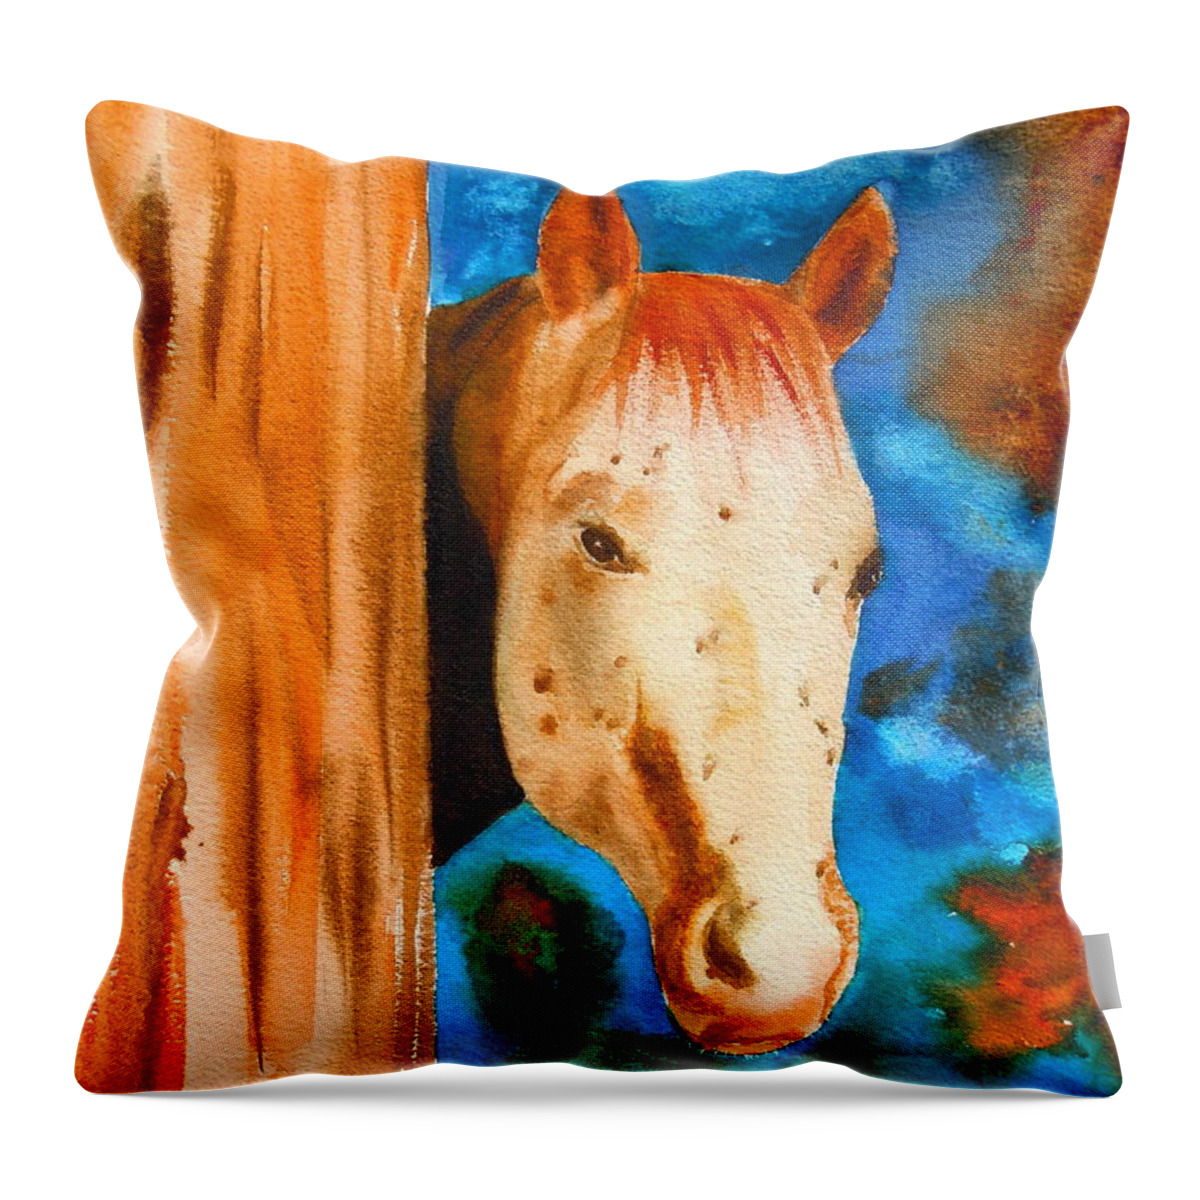 Sharon Mick Throw Pillow featuring the painting The Curious Appaloosa by Sharon Mick